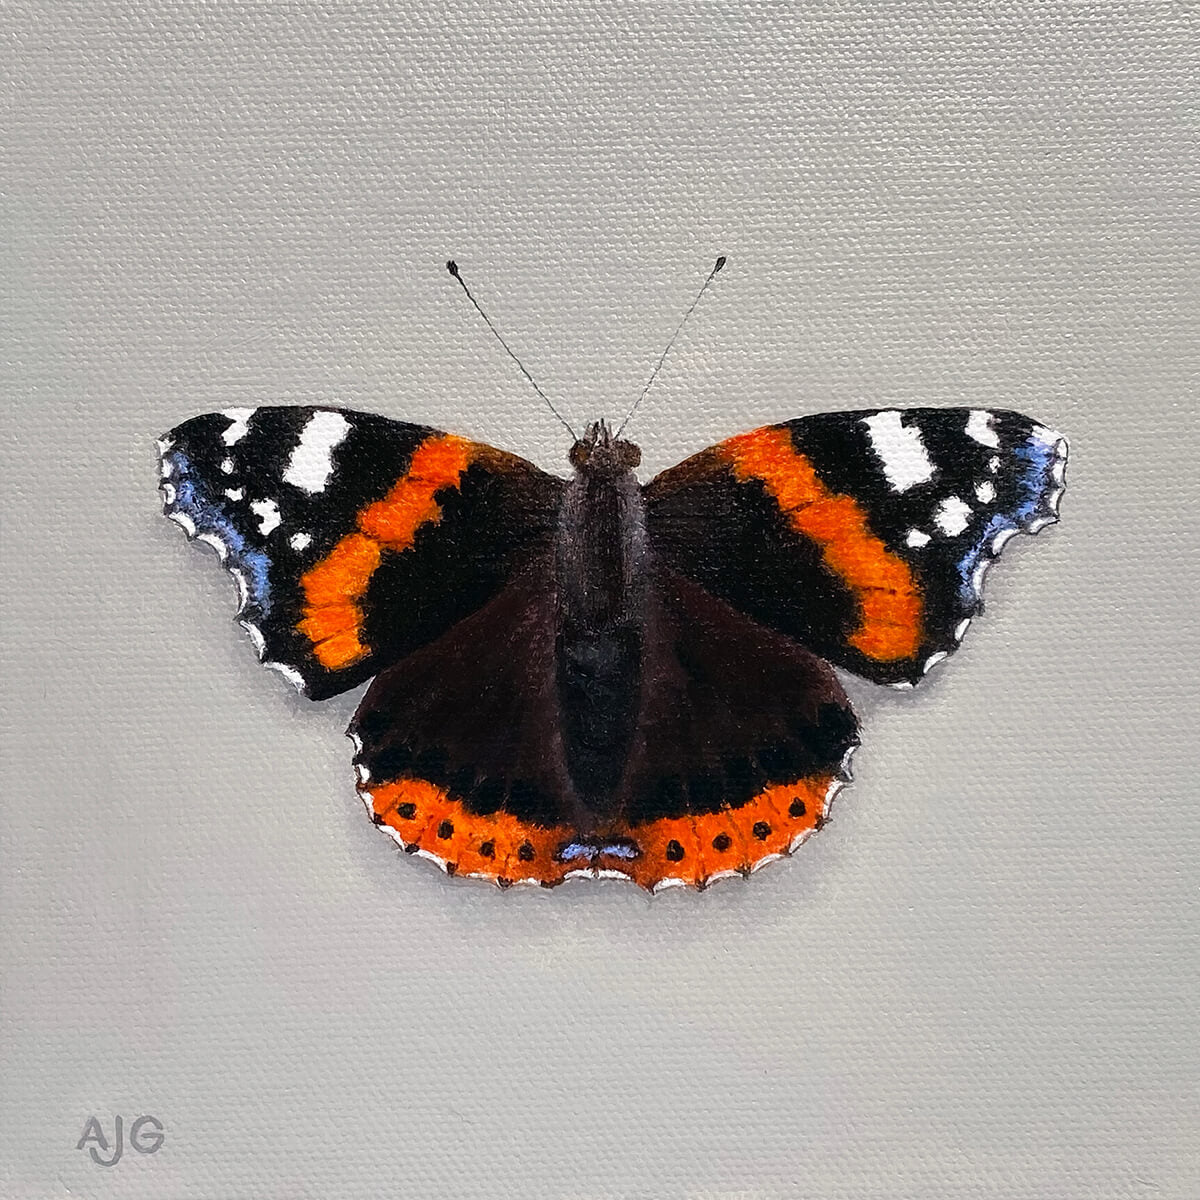 Original painting of a red admiral butterfly by Amanda Gosse AJG Artist